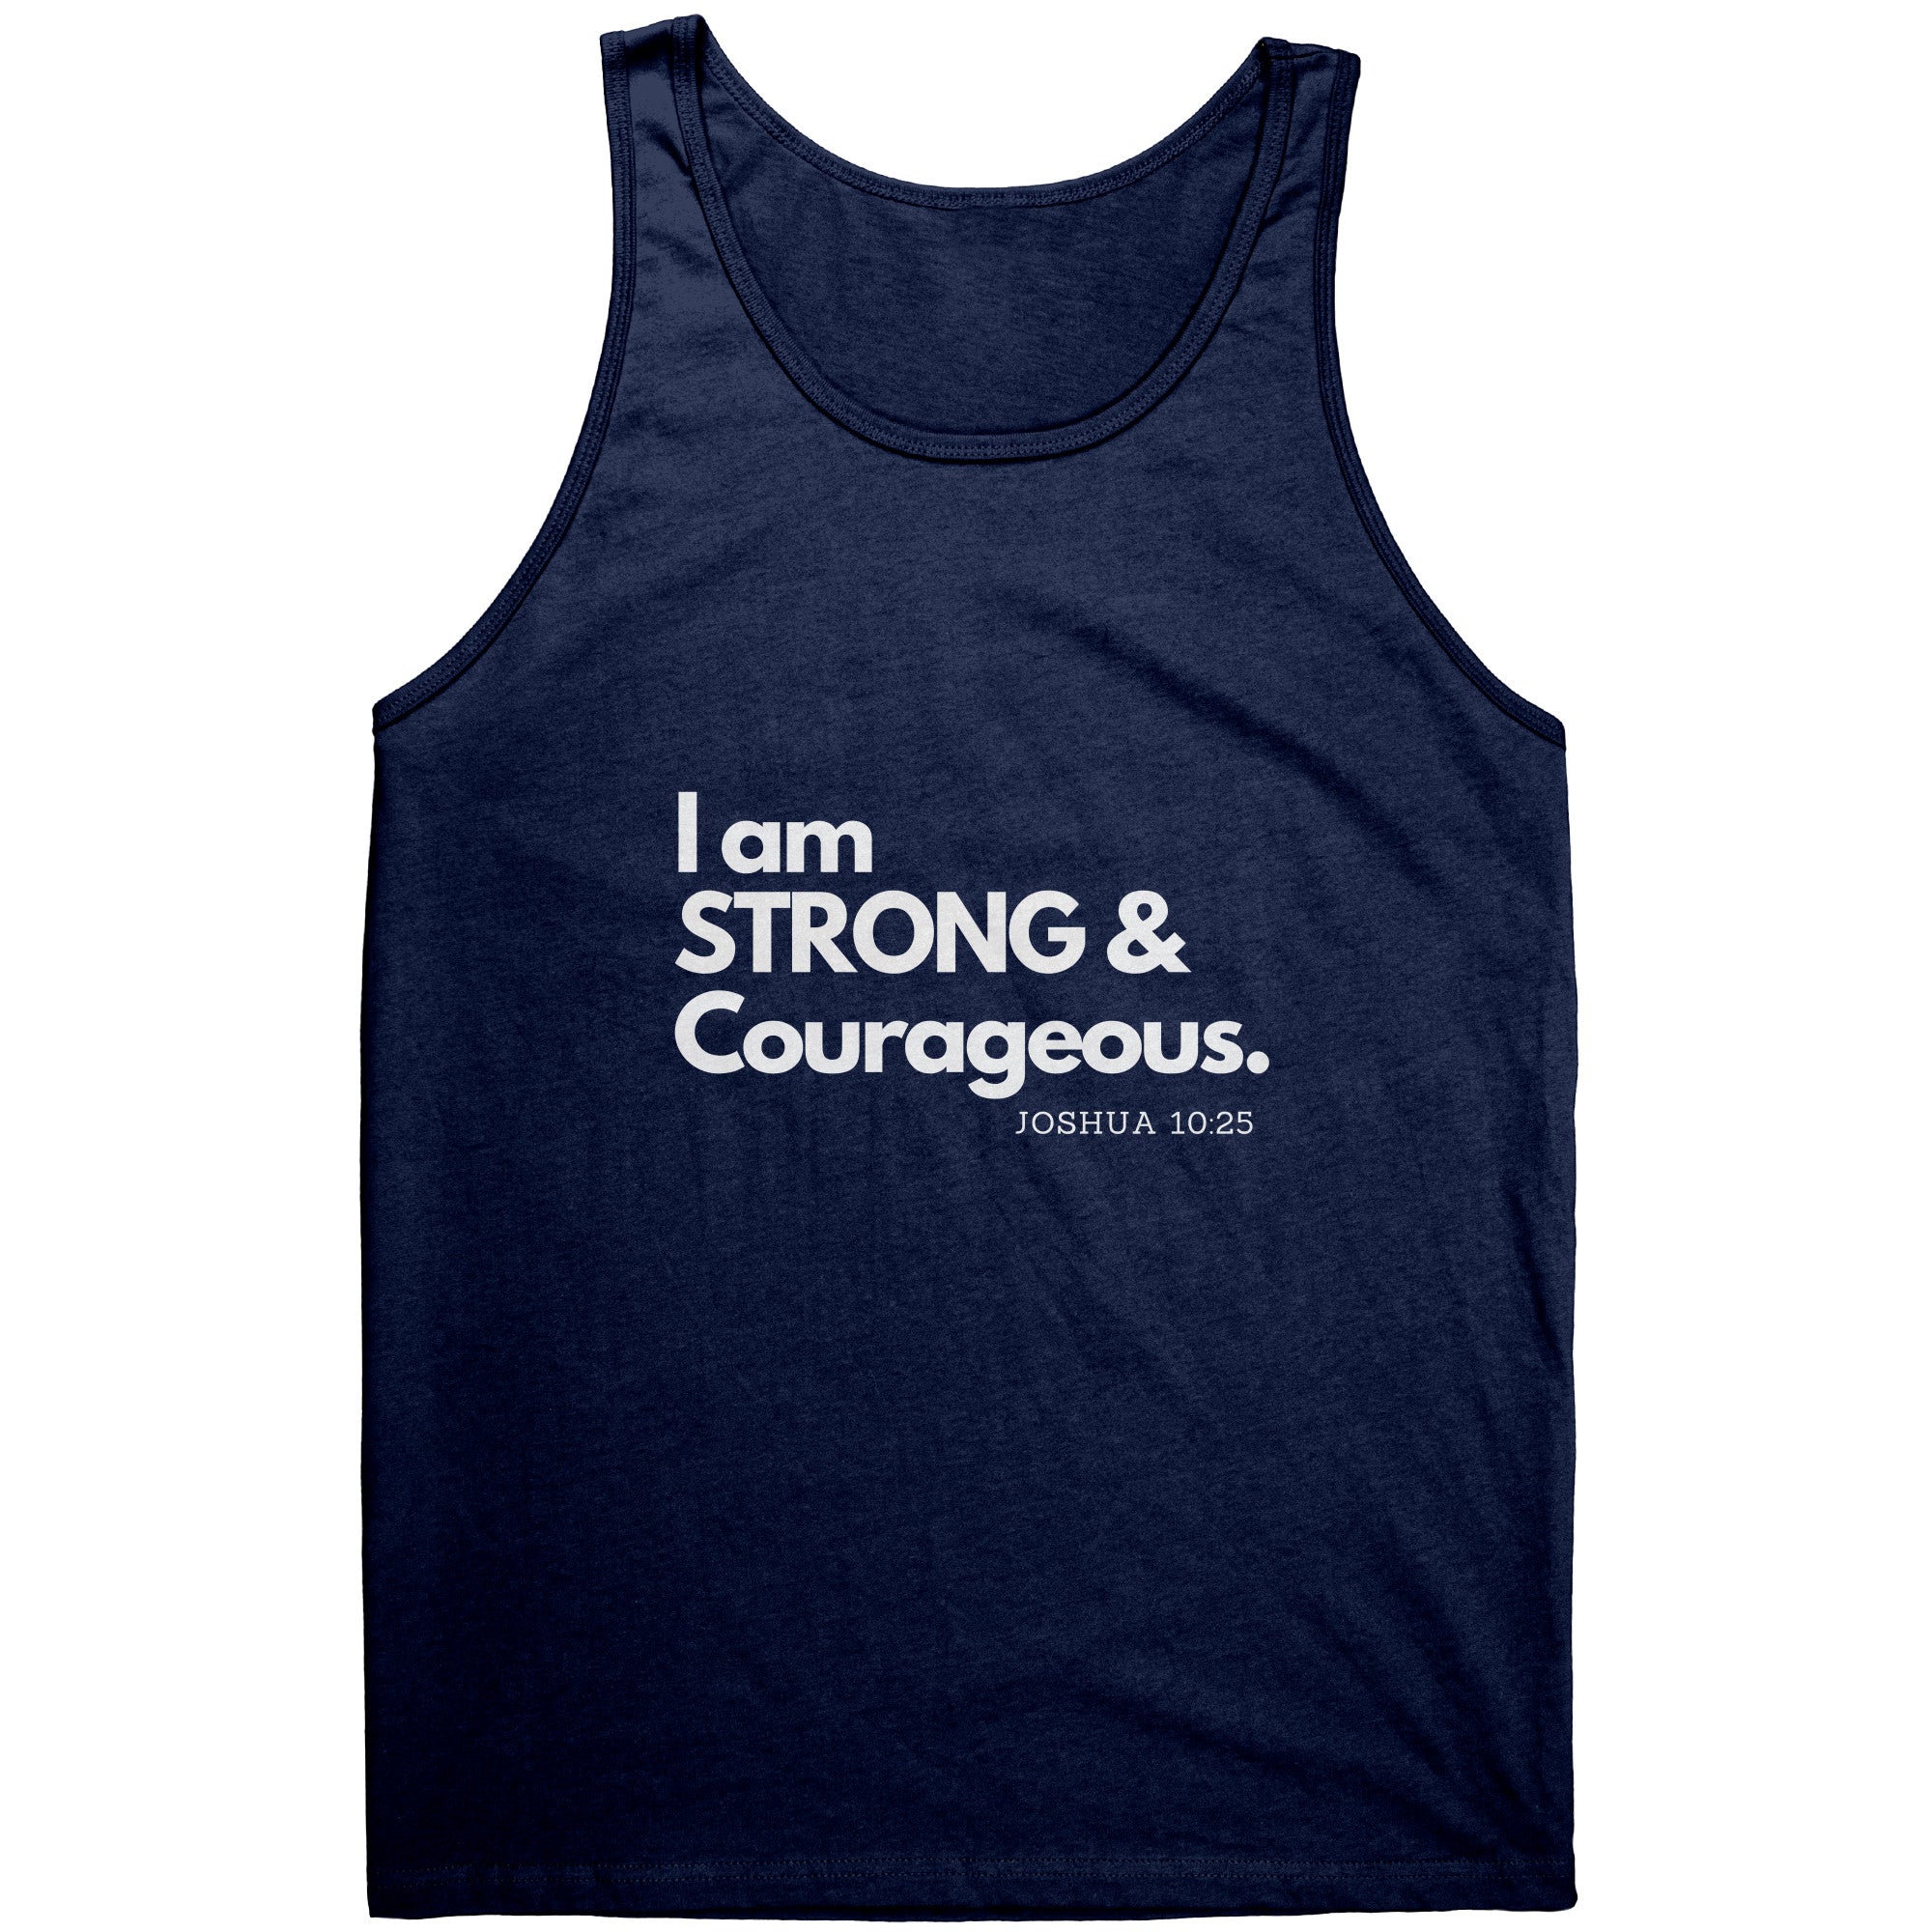 Strong & Courageous Tank